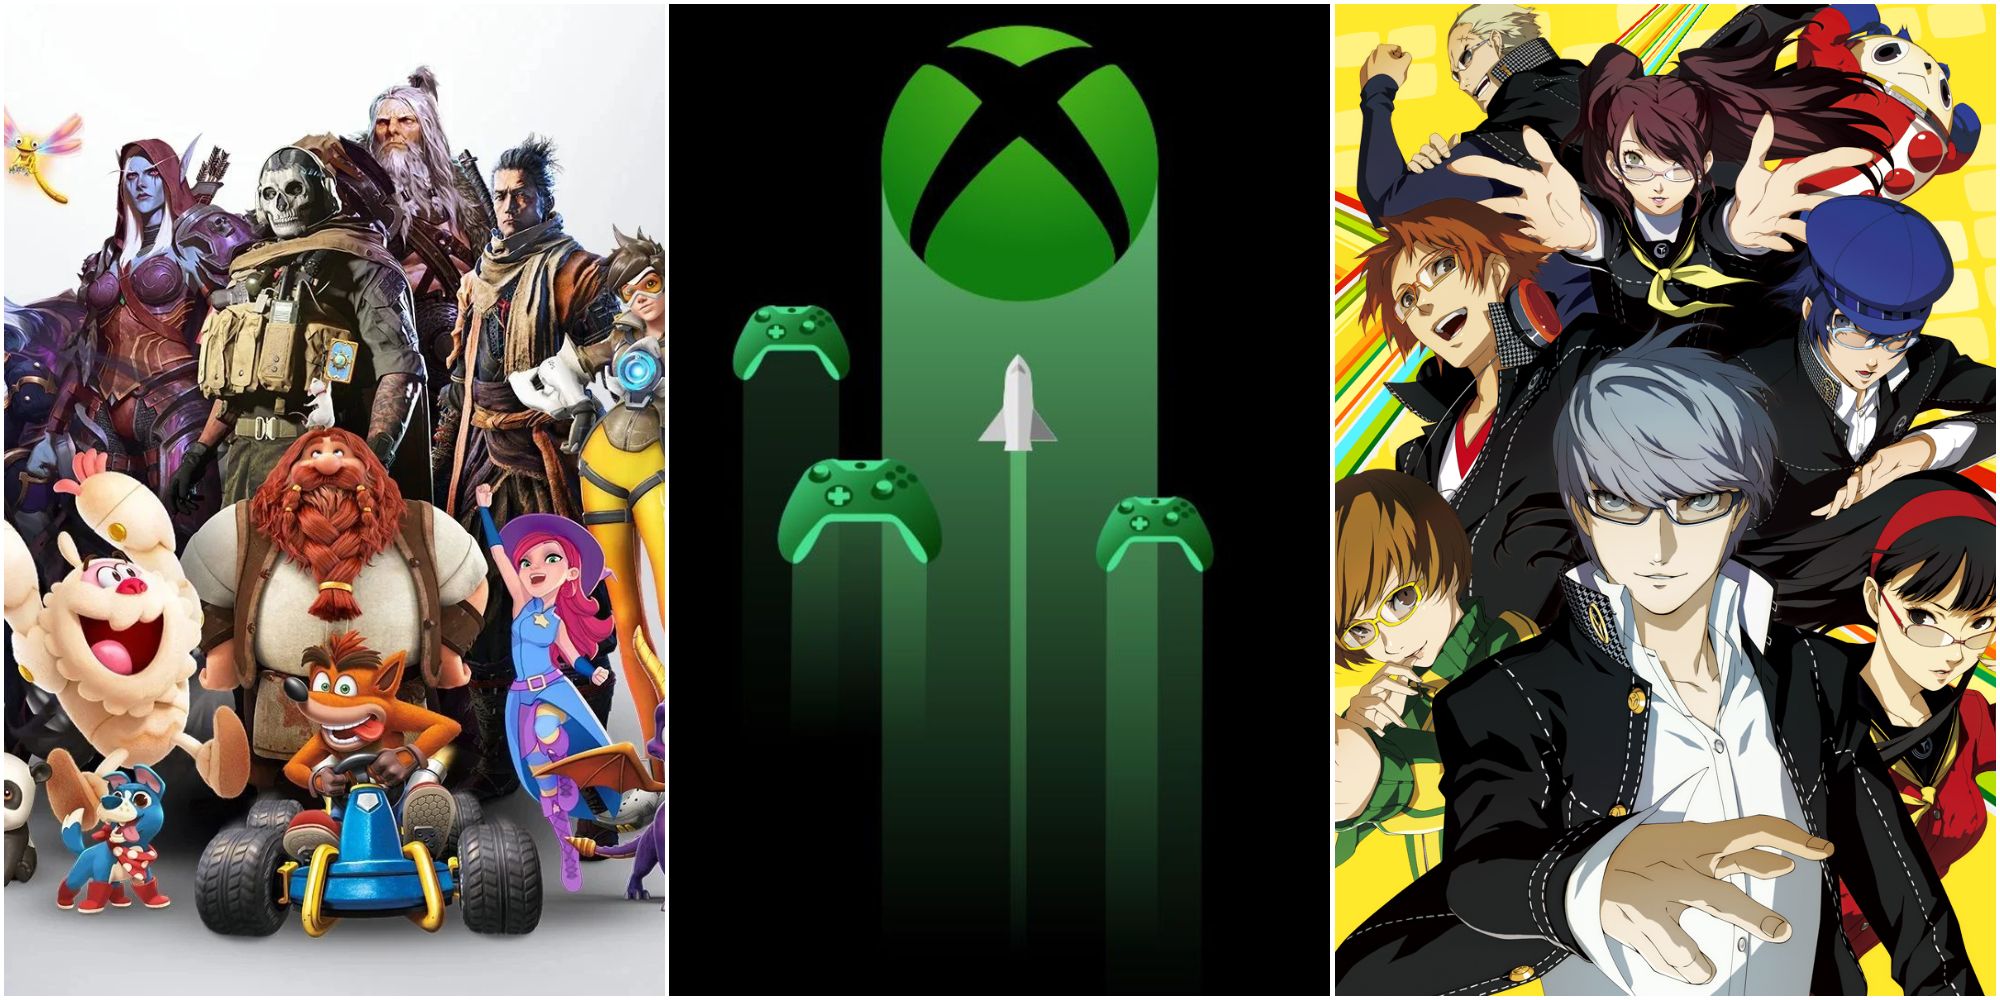 A bunch of Activision Blizzard properties, and Xbox logo, and the characters from Persona 4 Golden